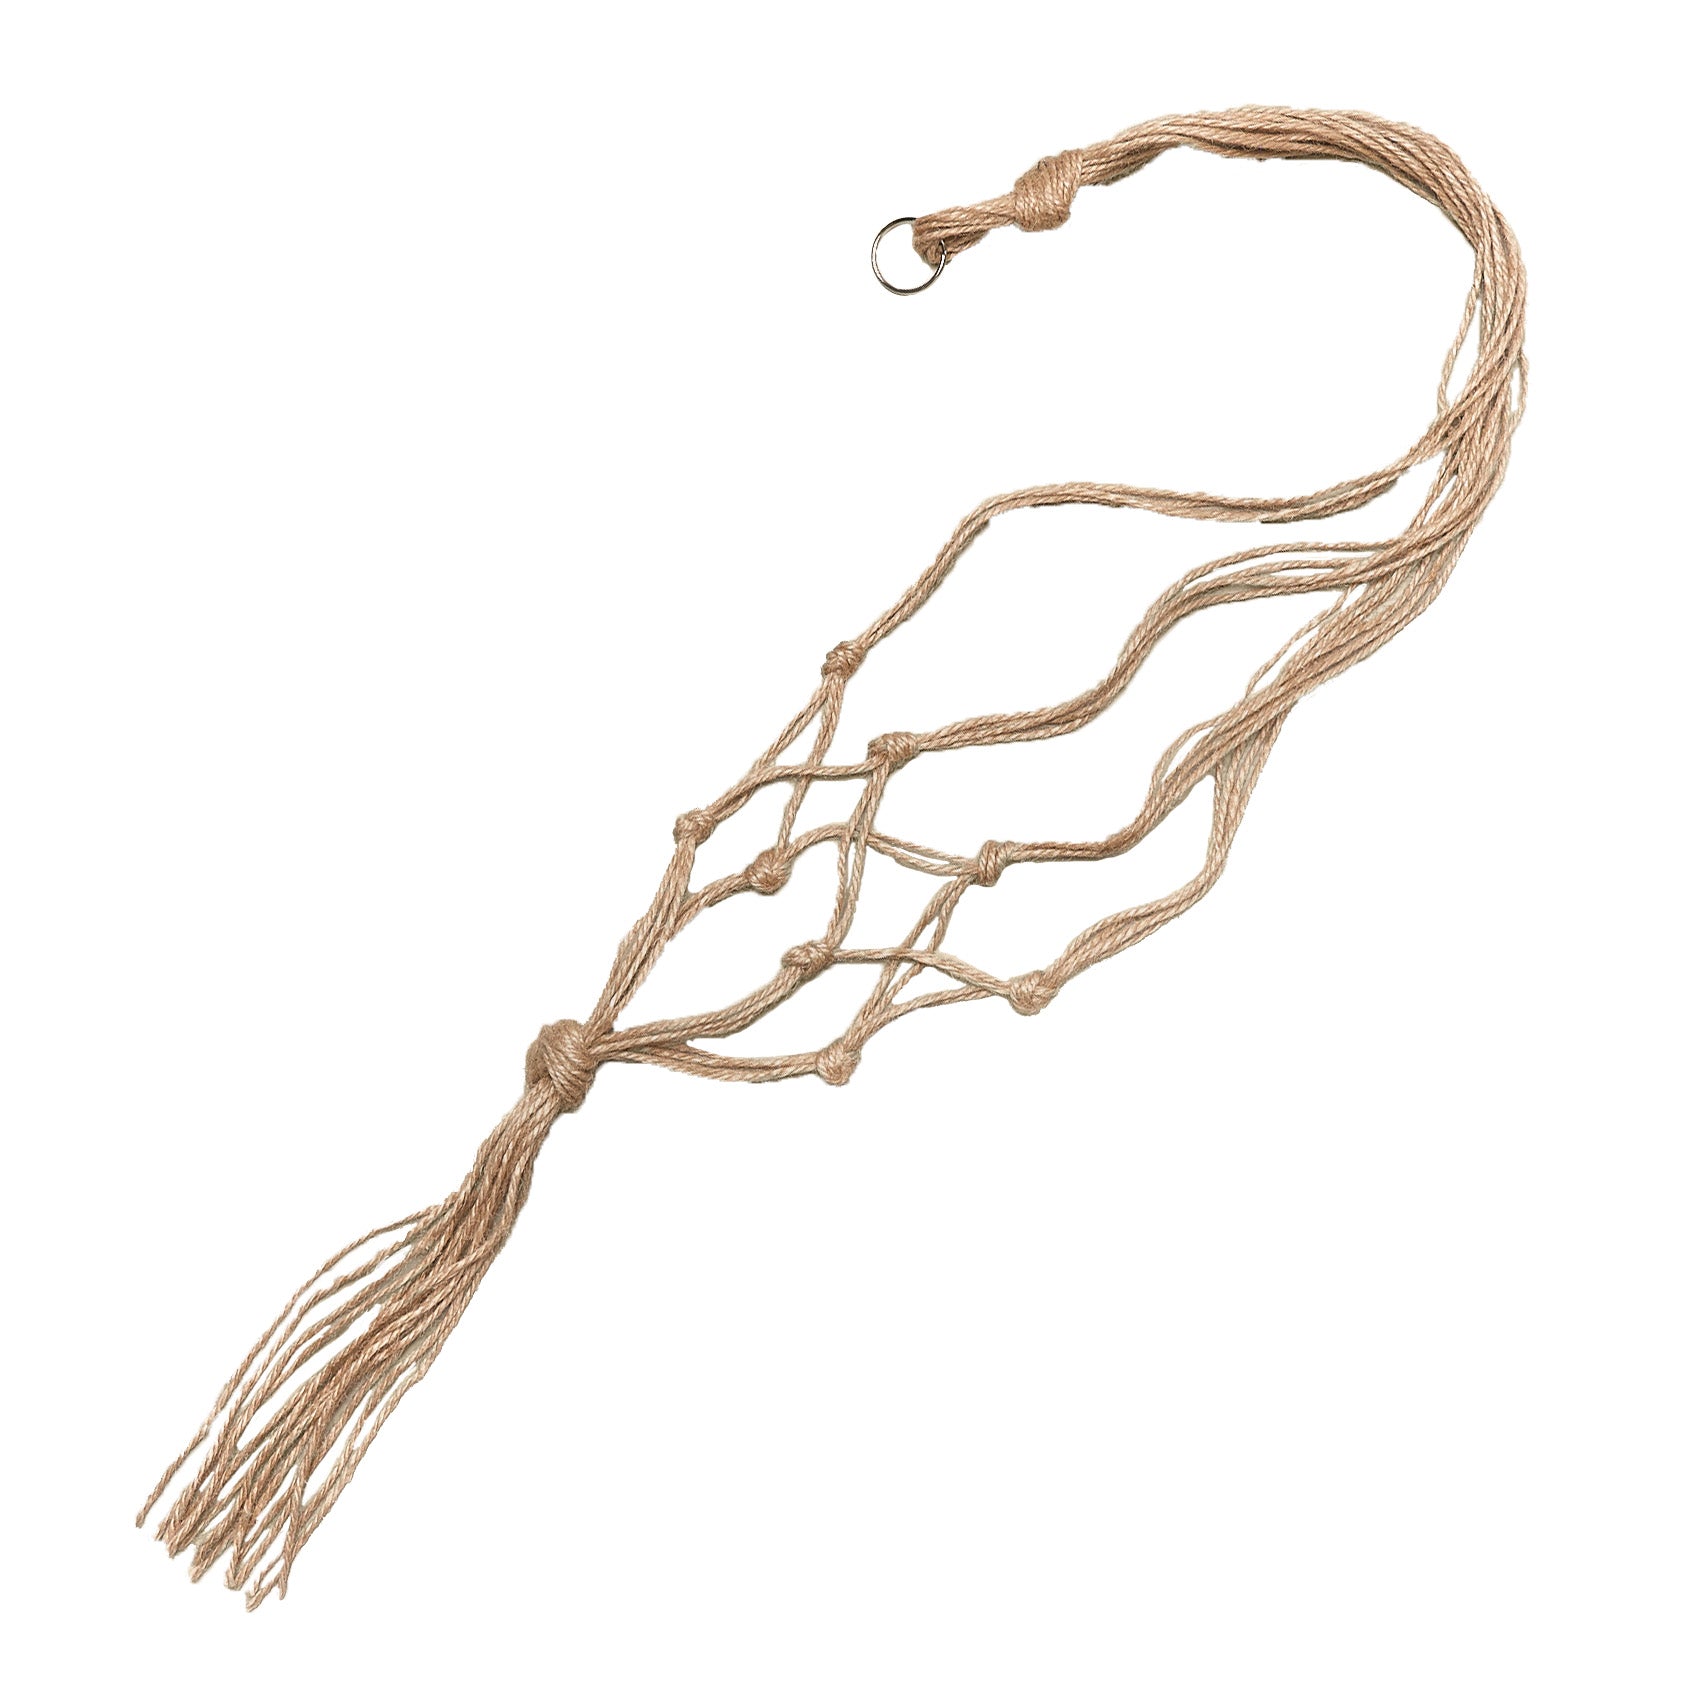 A beige necklace with a tassel on it, available at the best garden nursery near me.